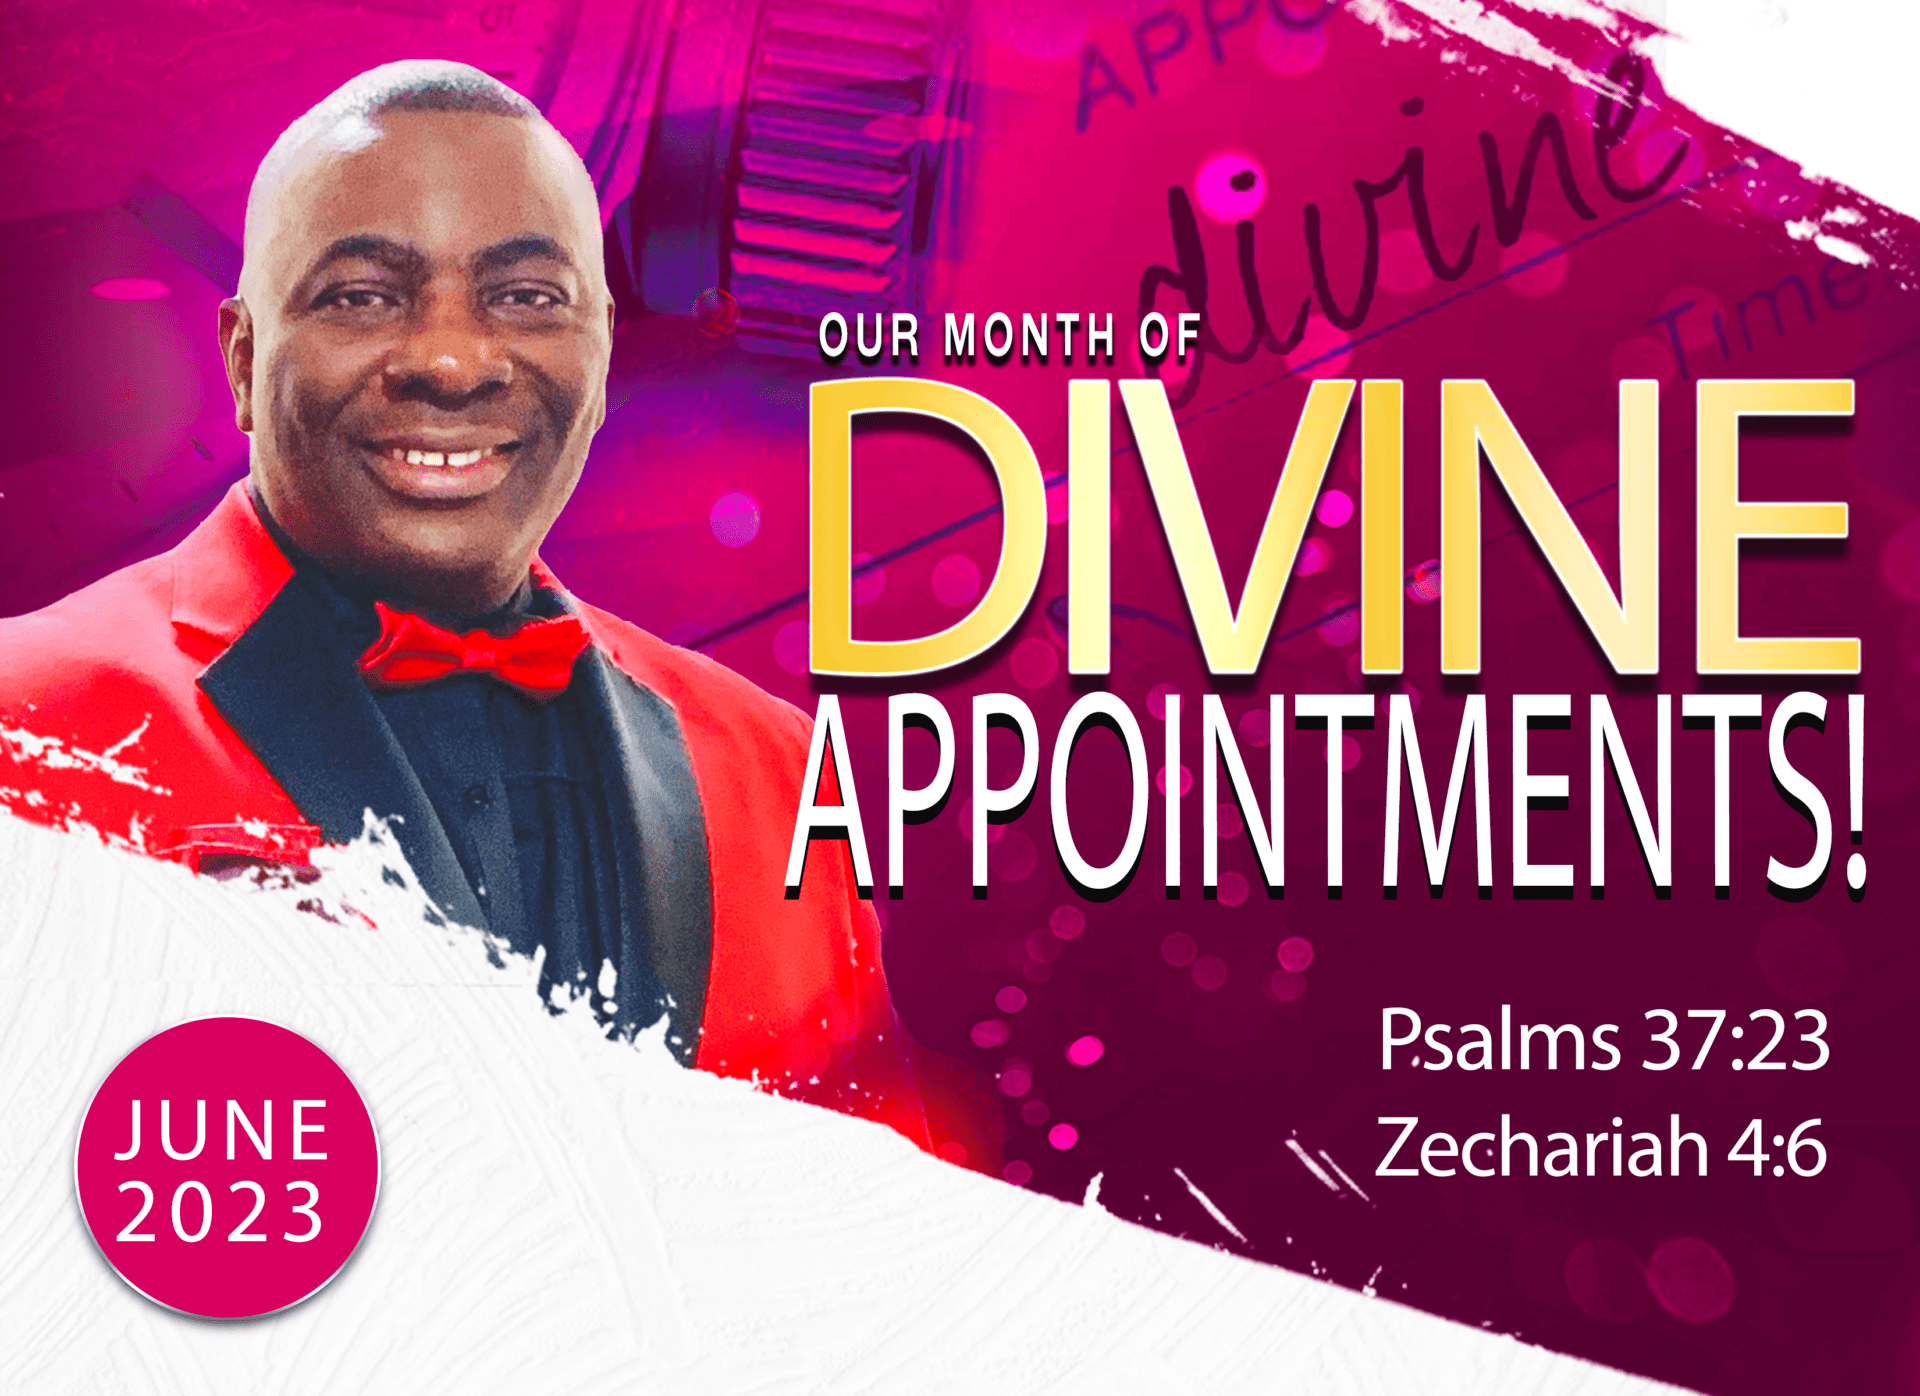 You are currently viewing Our Month of DIVINE APPOINTMENTS